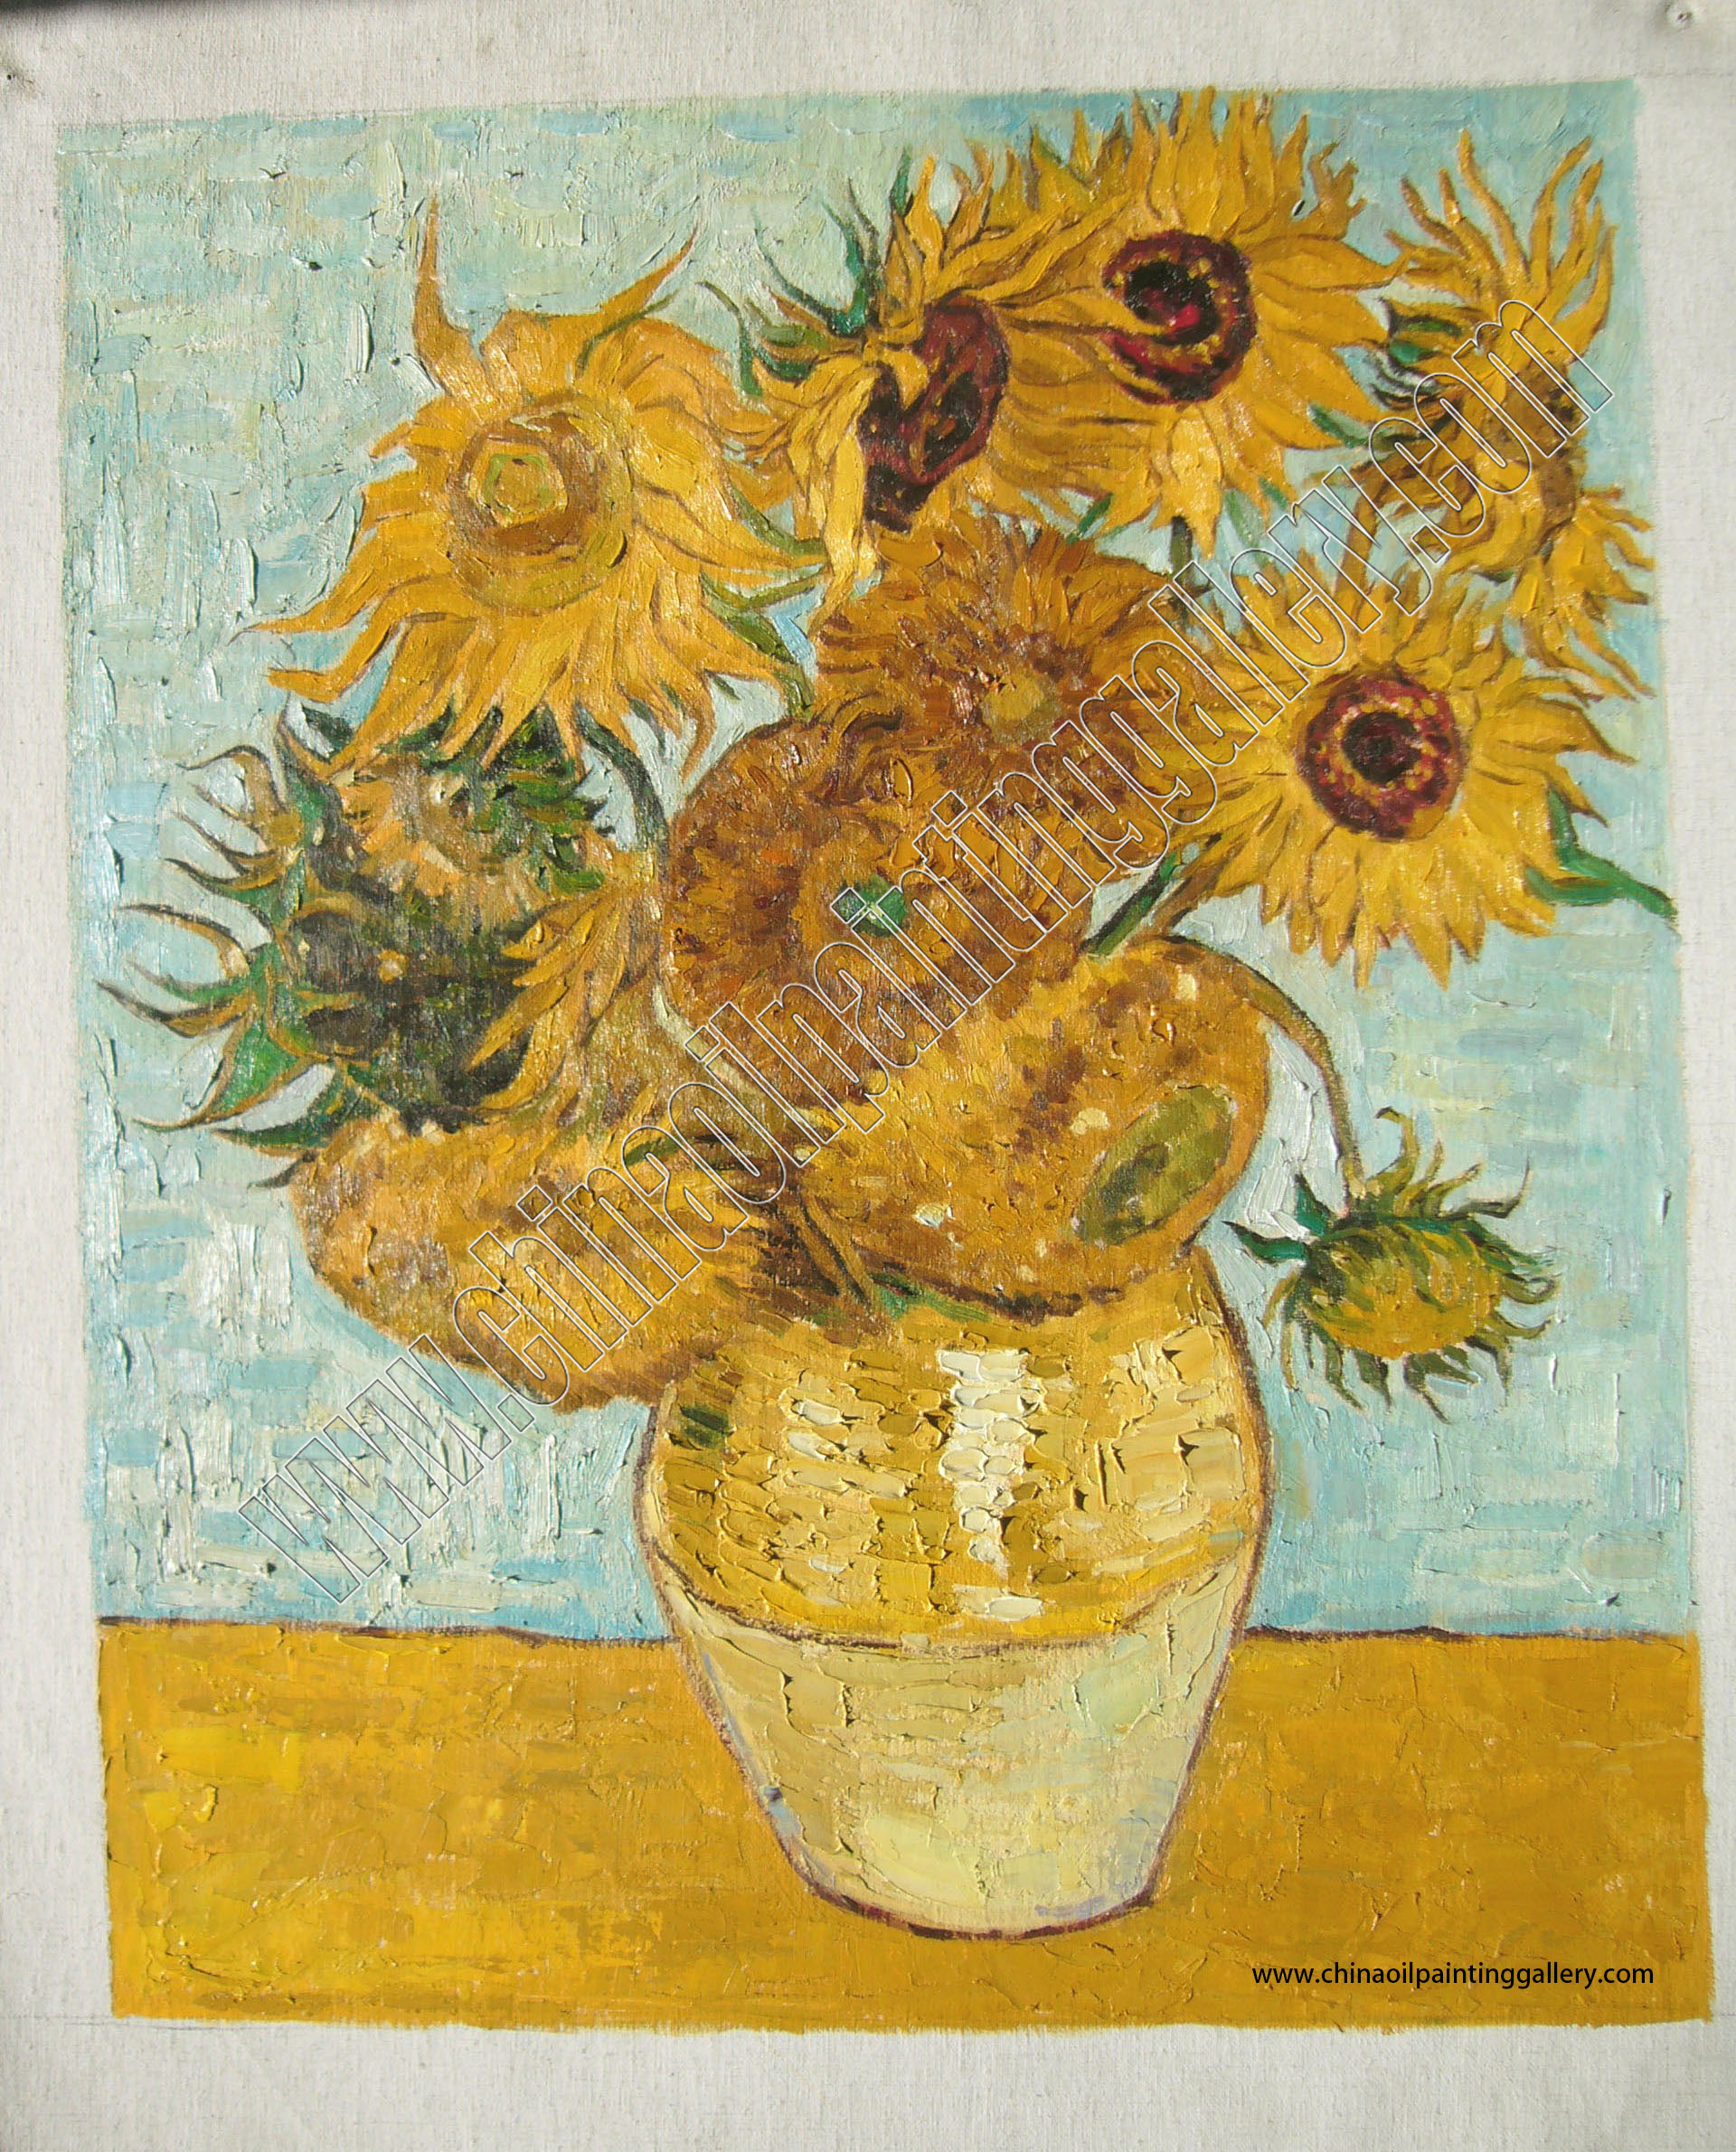 Vincent van Gogh Sunflowers - Oil painting reproductions 11